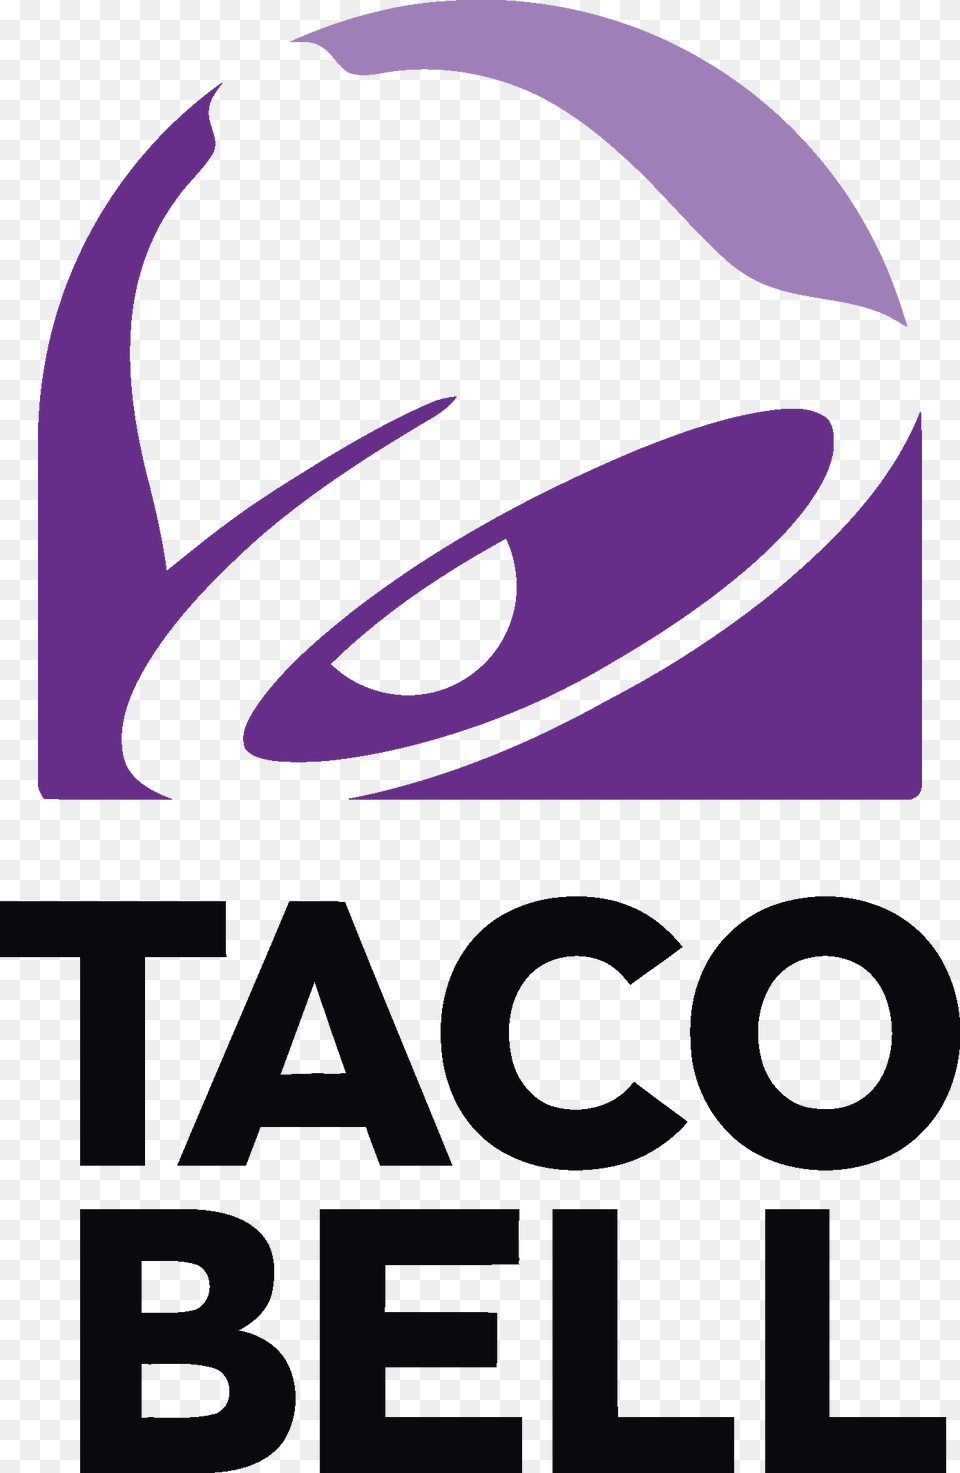 Taco Bell Logo Pdf Vector Icon Template Clipart Taco Bell Emblem Hd, Clothing, Hat, Animal, Fish Free Transparent Png